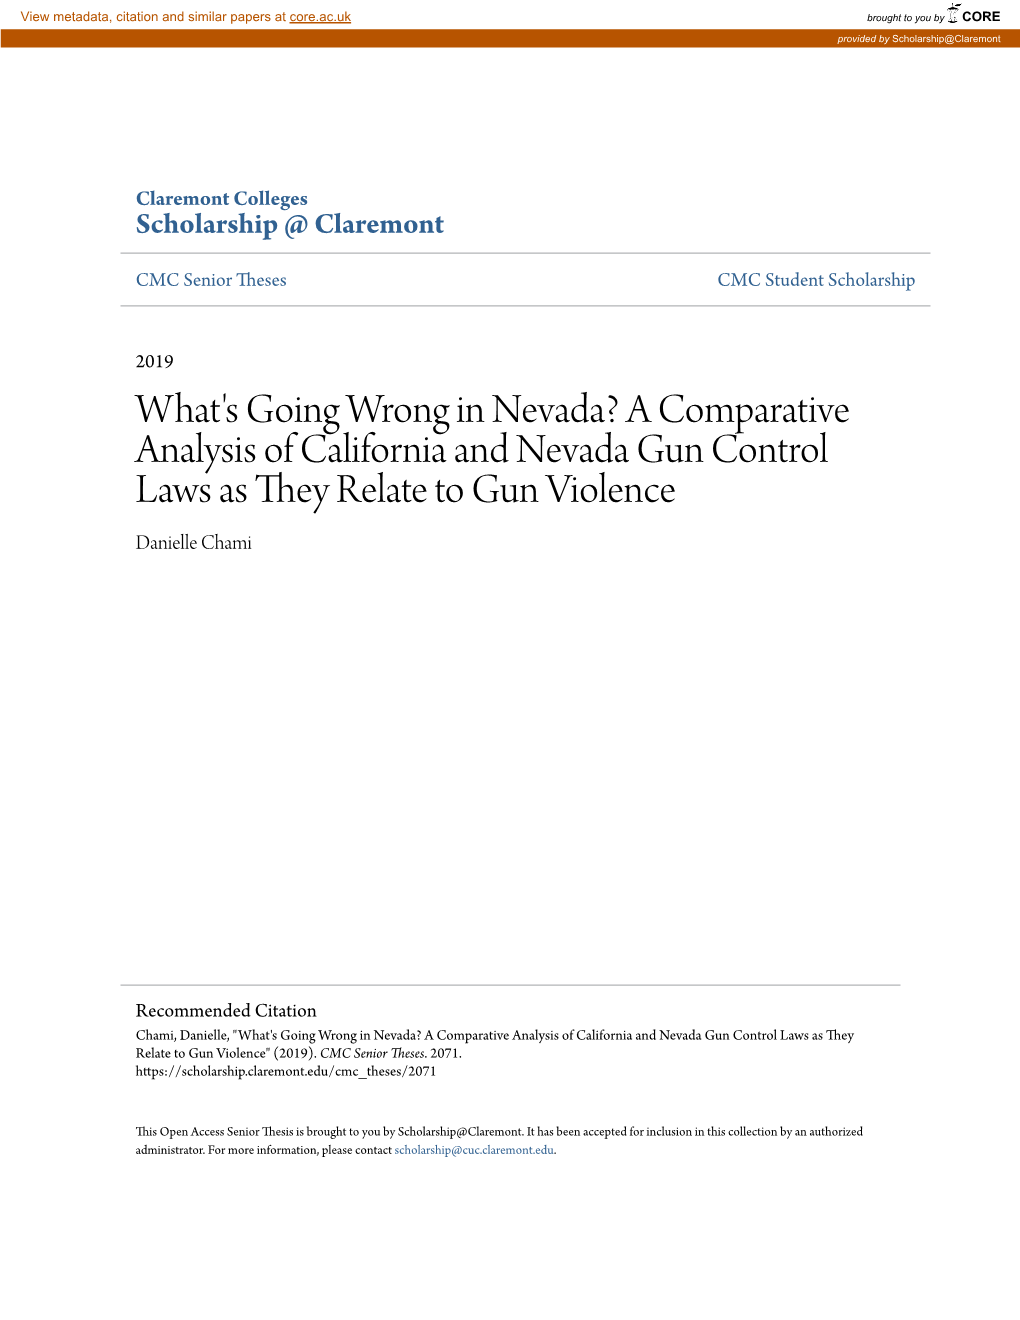 A Comparative Analysis of California and Nevada Gun Control Laws As They Relate to Gun Violence Danielle Chami